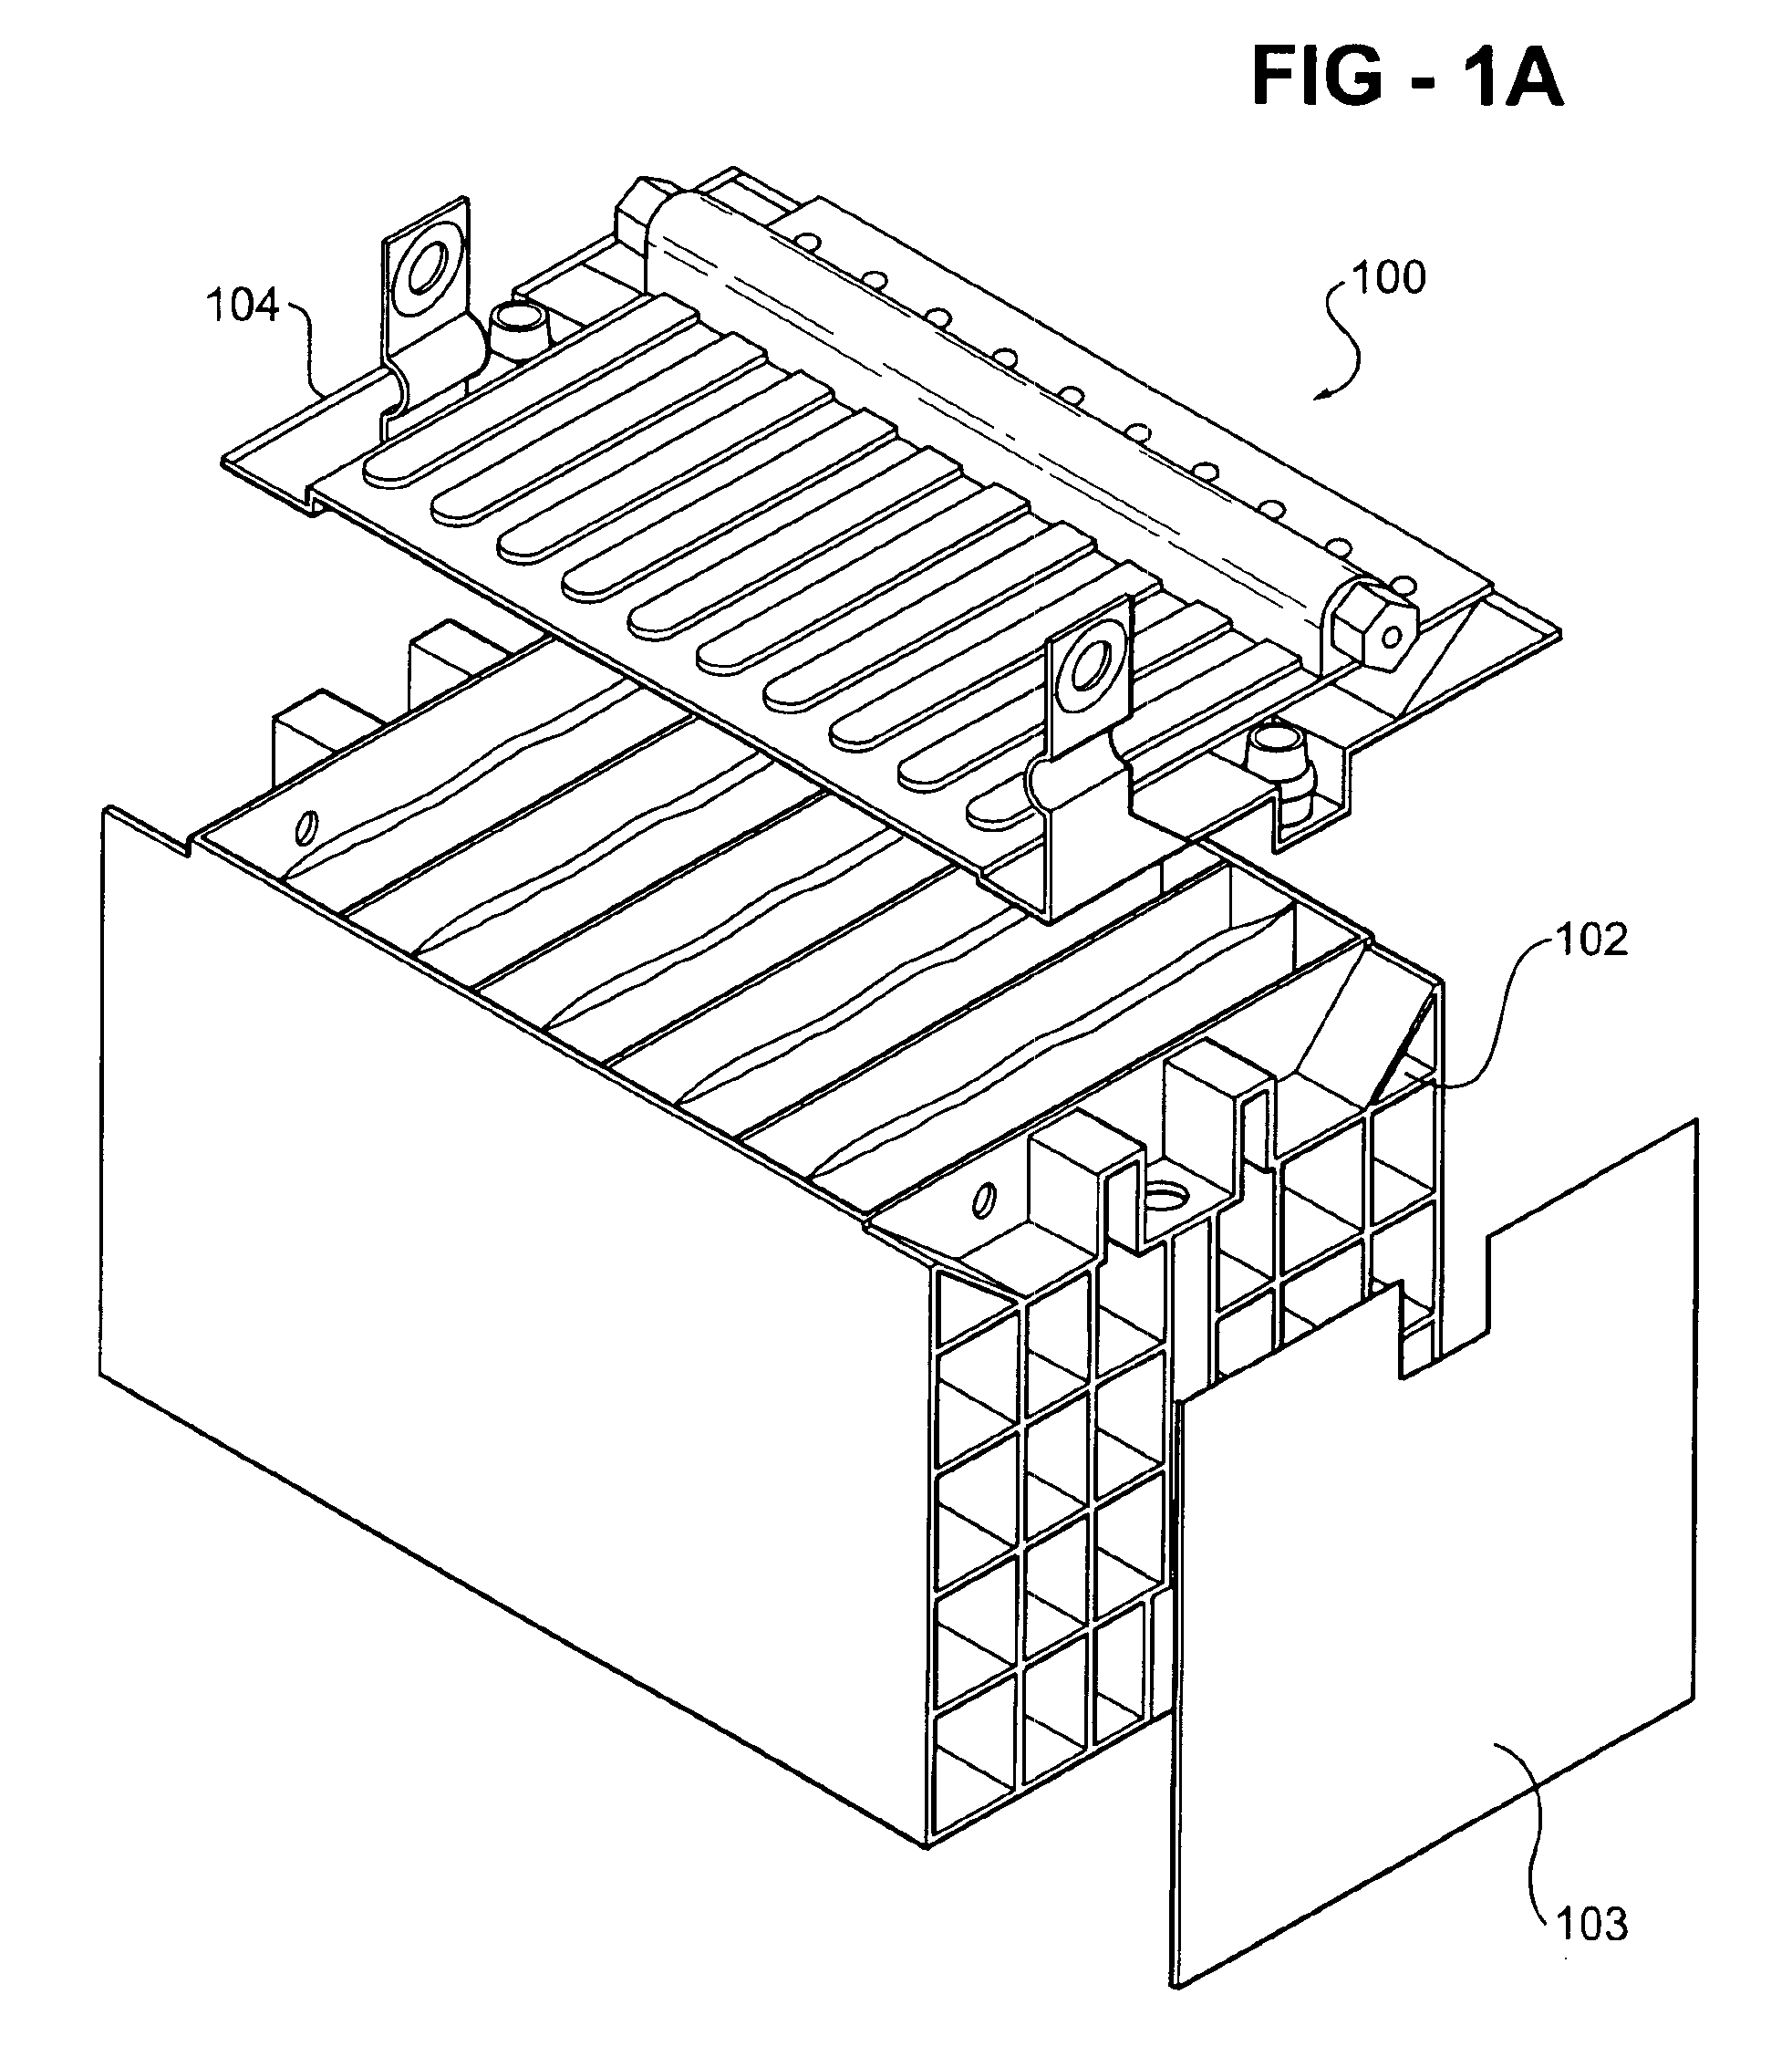 Monoblock battery assembly with cross-flow cooling